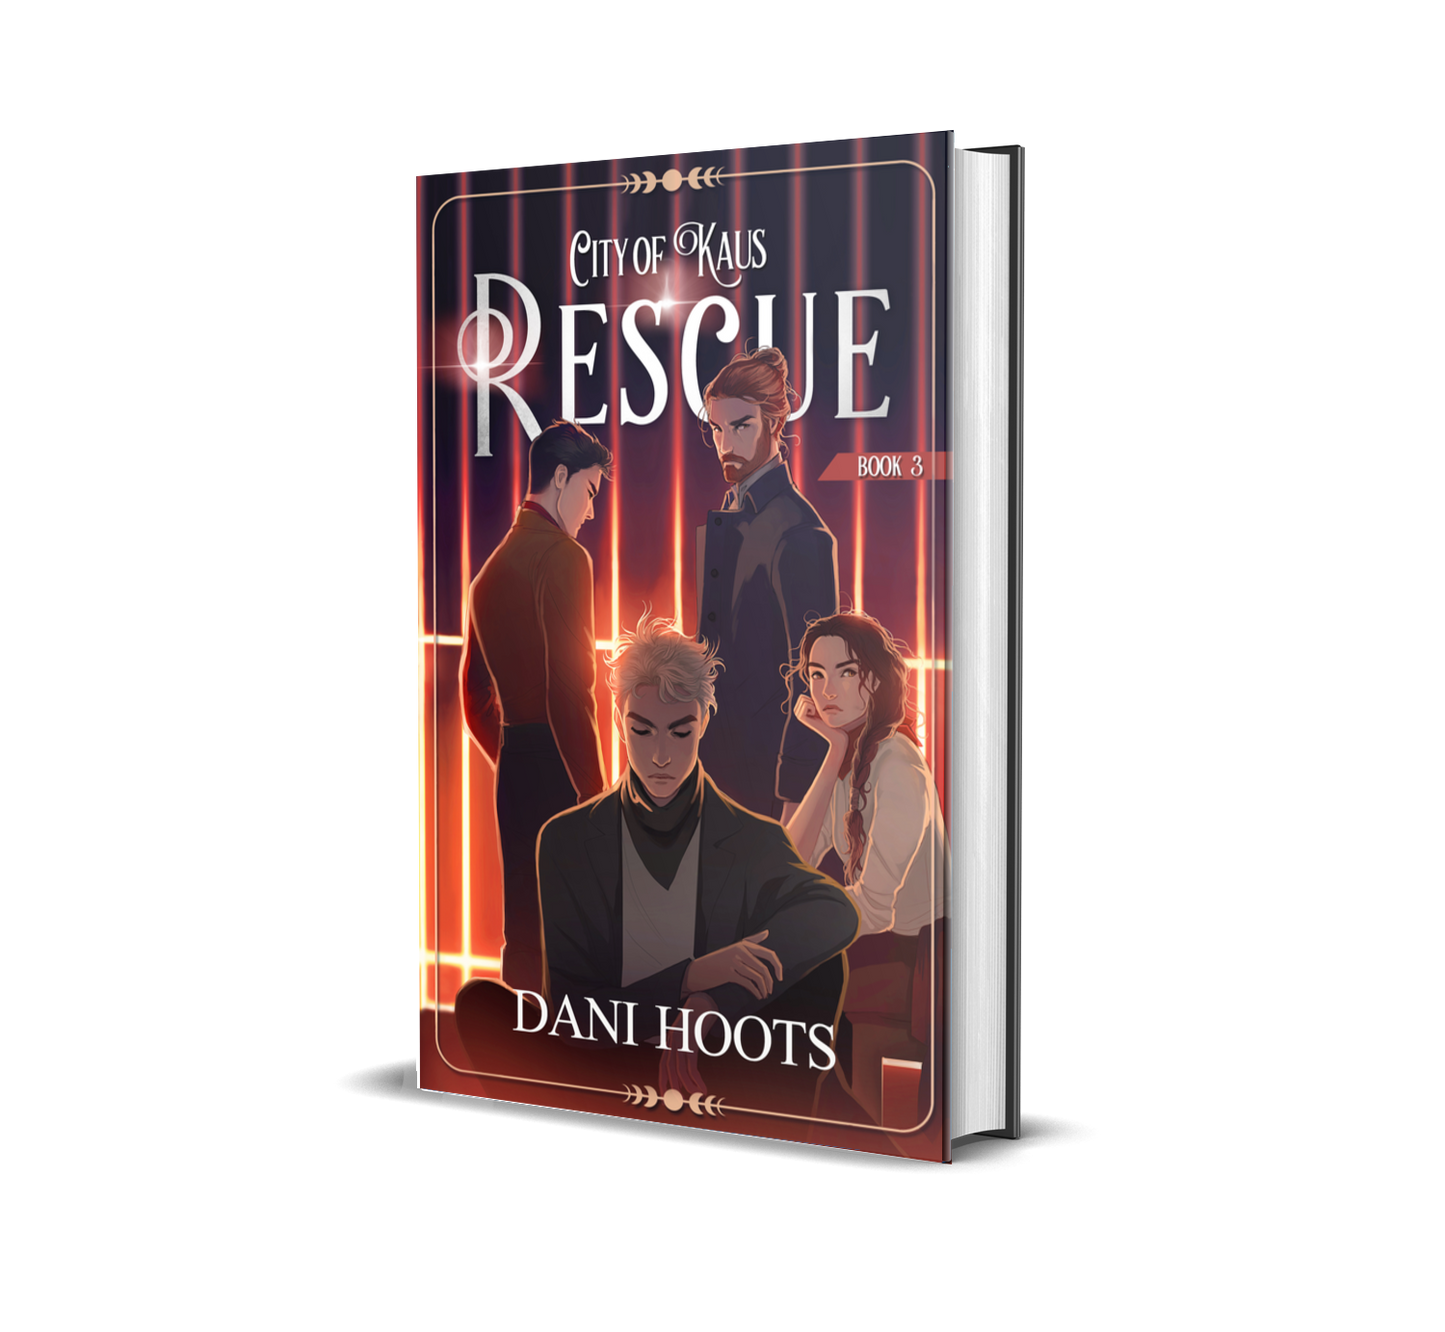 Rescue (The City of Kaus Series, Book 3) hardcover — SIGNED